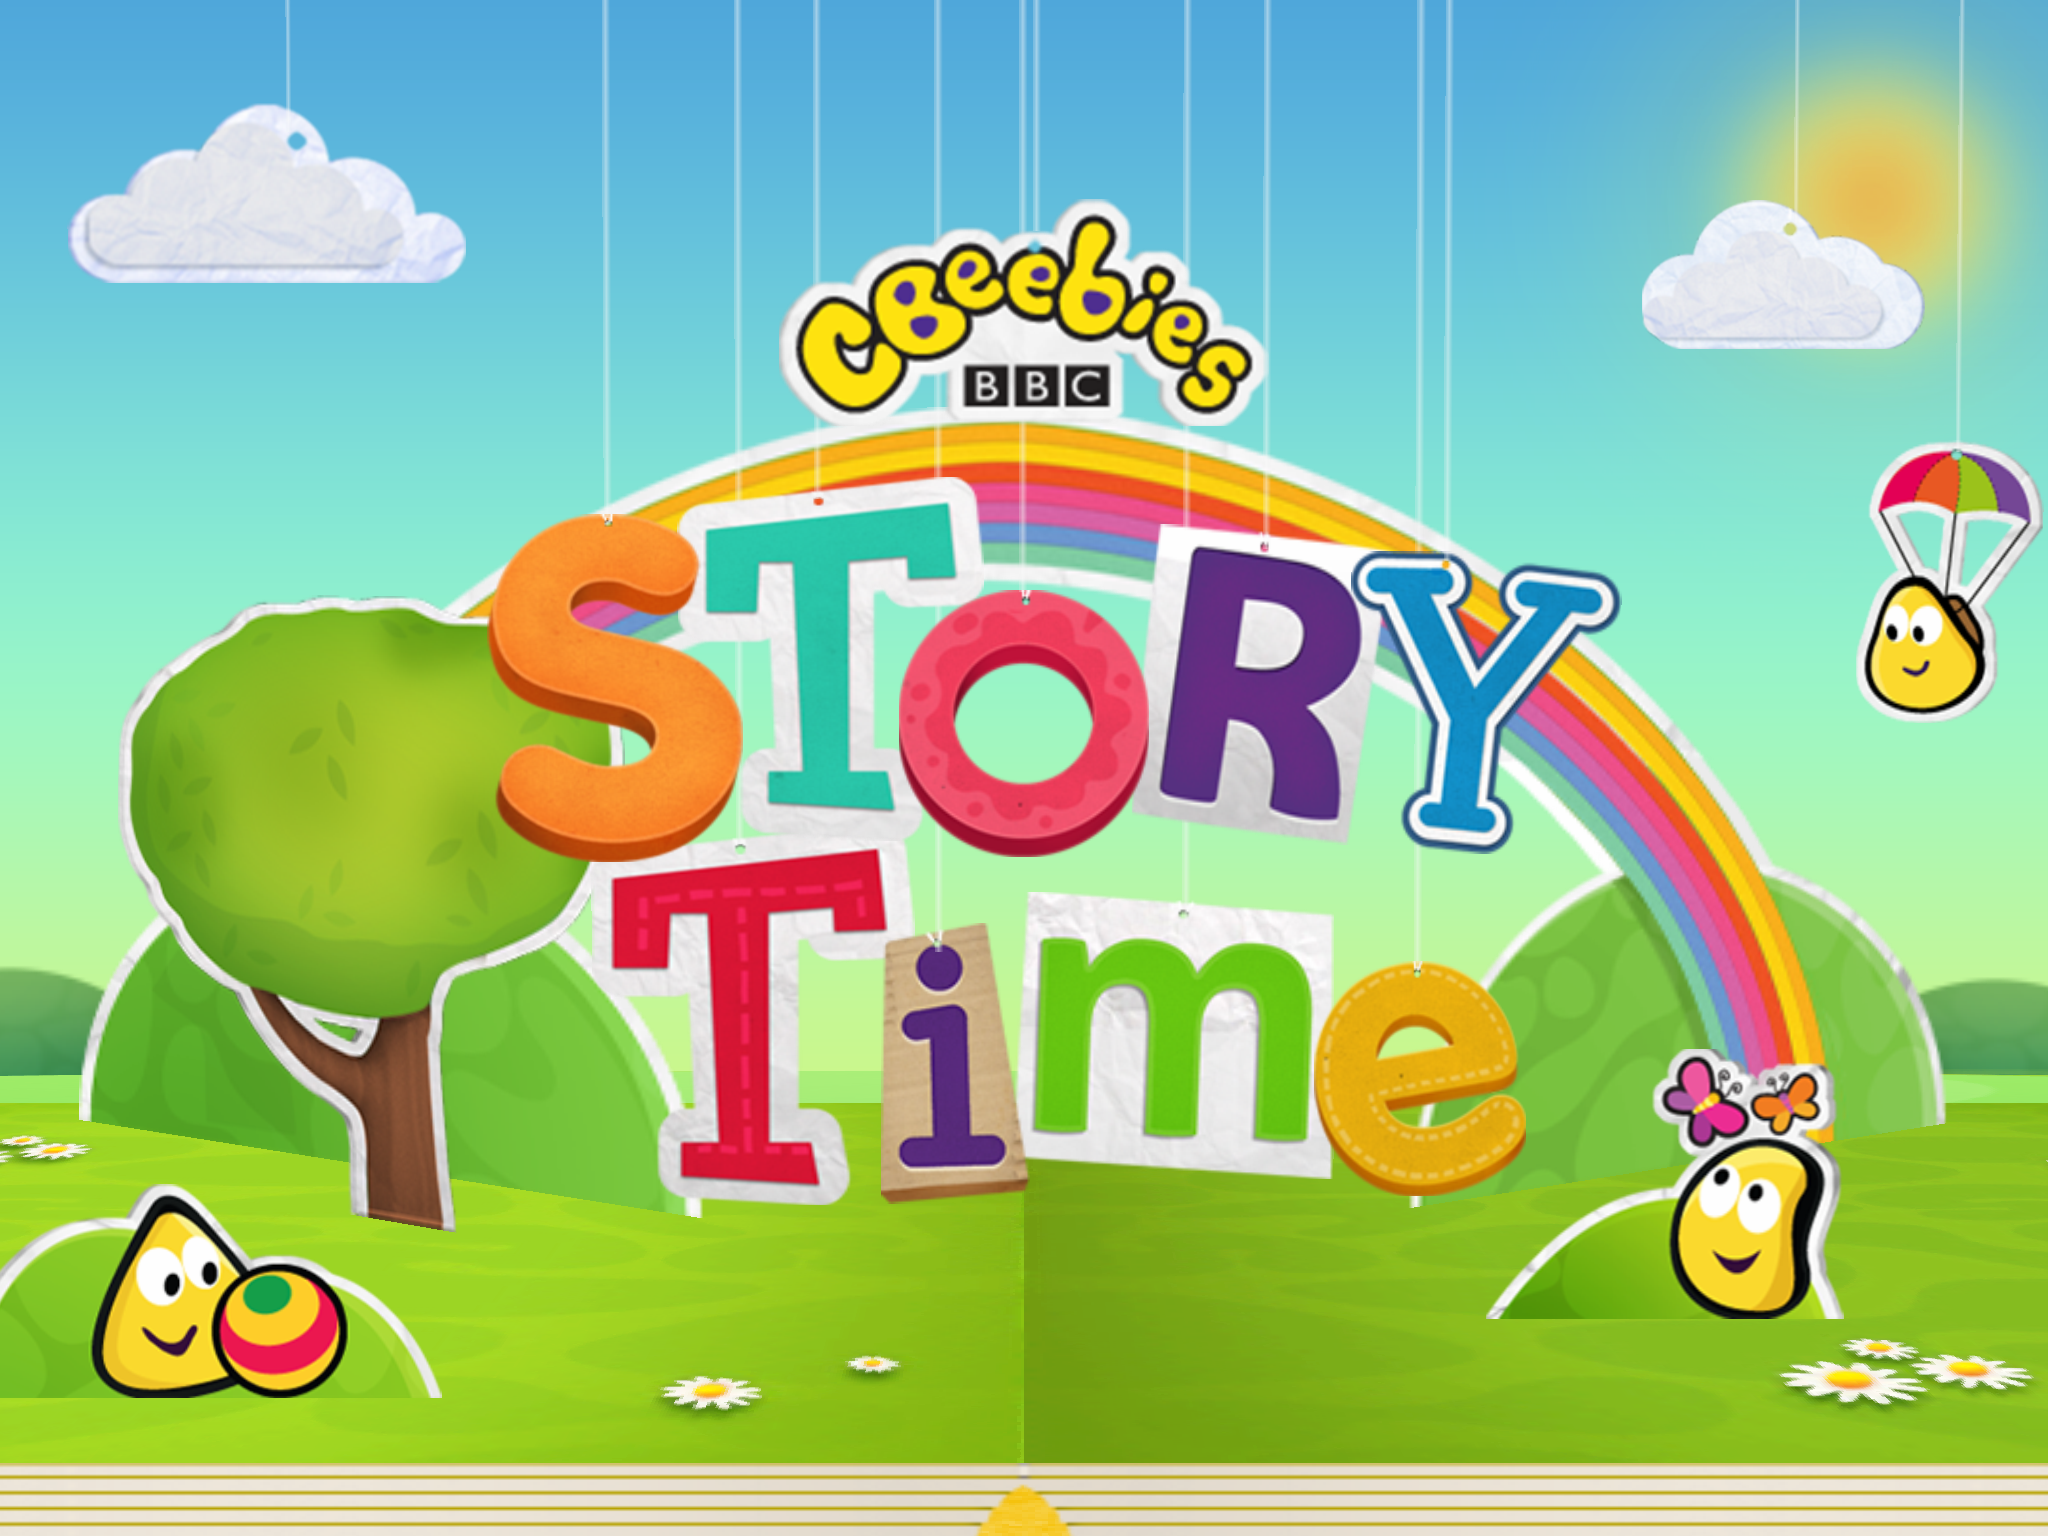 cbeebies storytime brings octonauts grandpa in my pocket and others to the ipad image 1